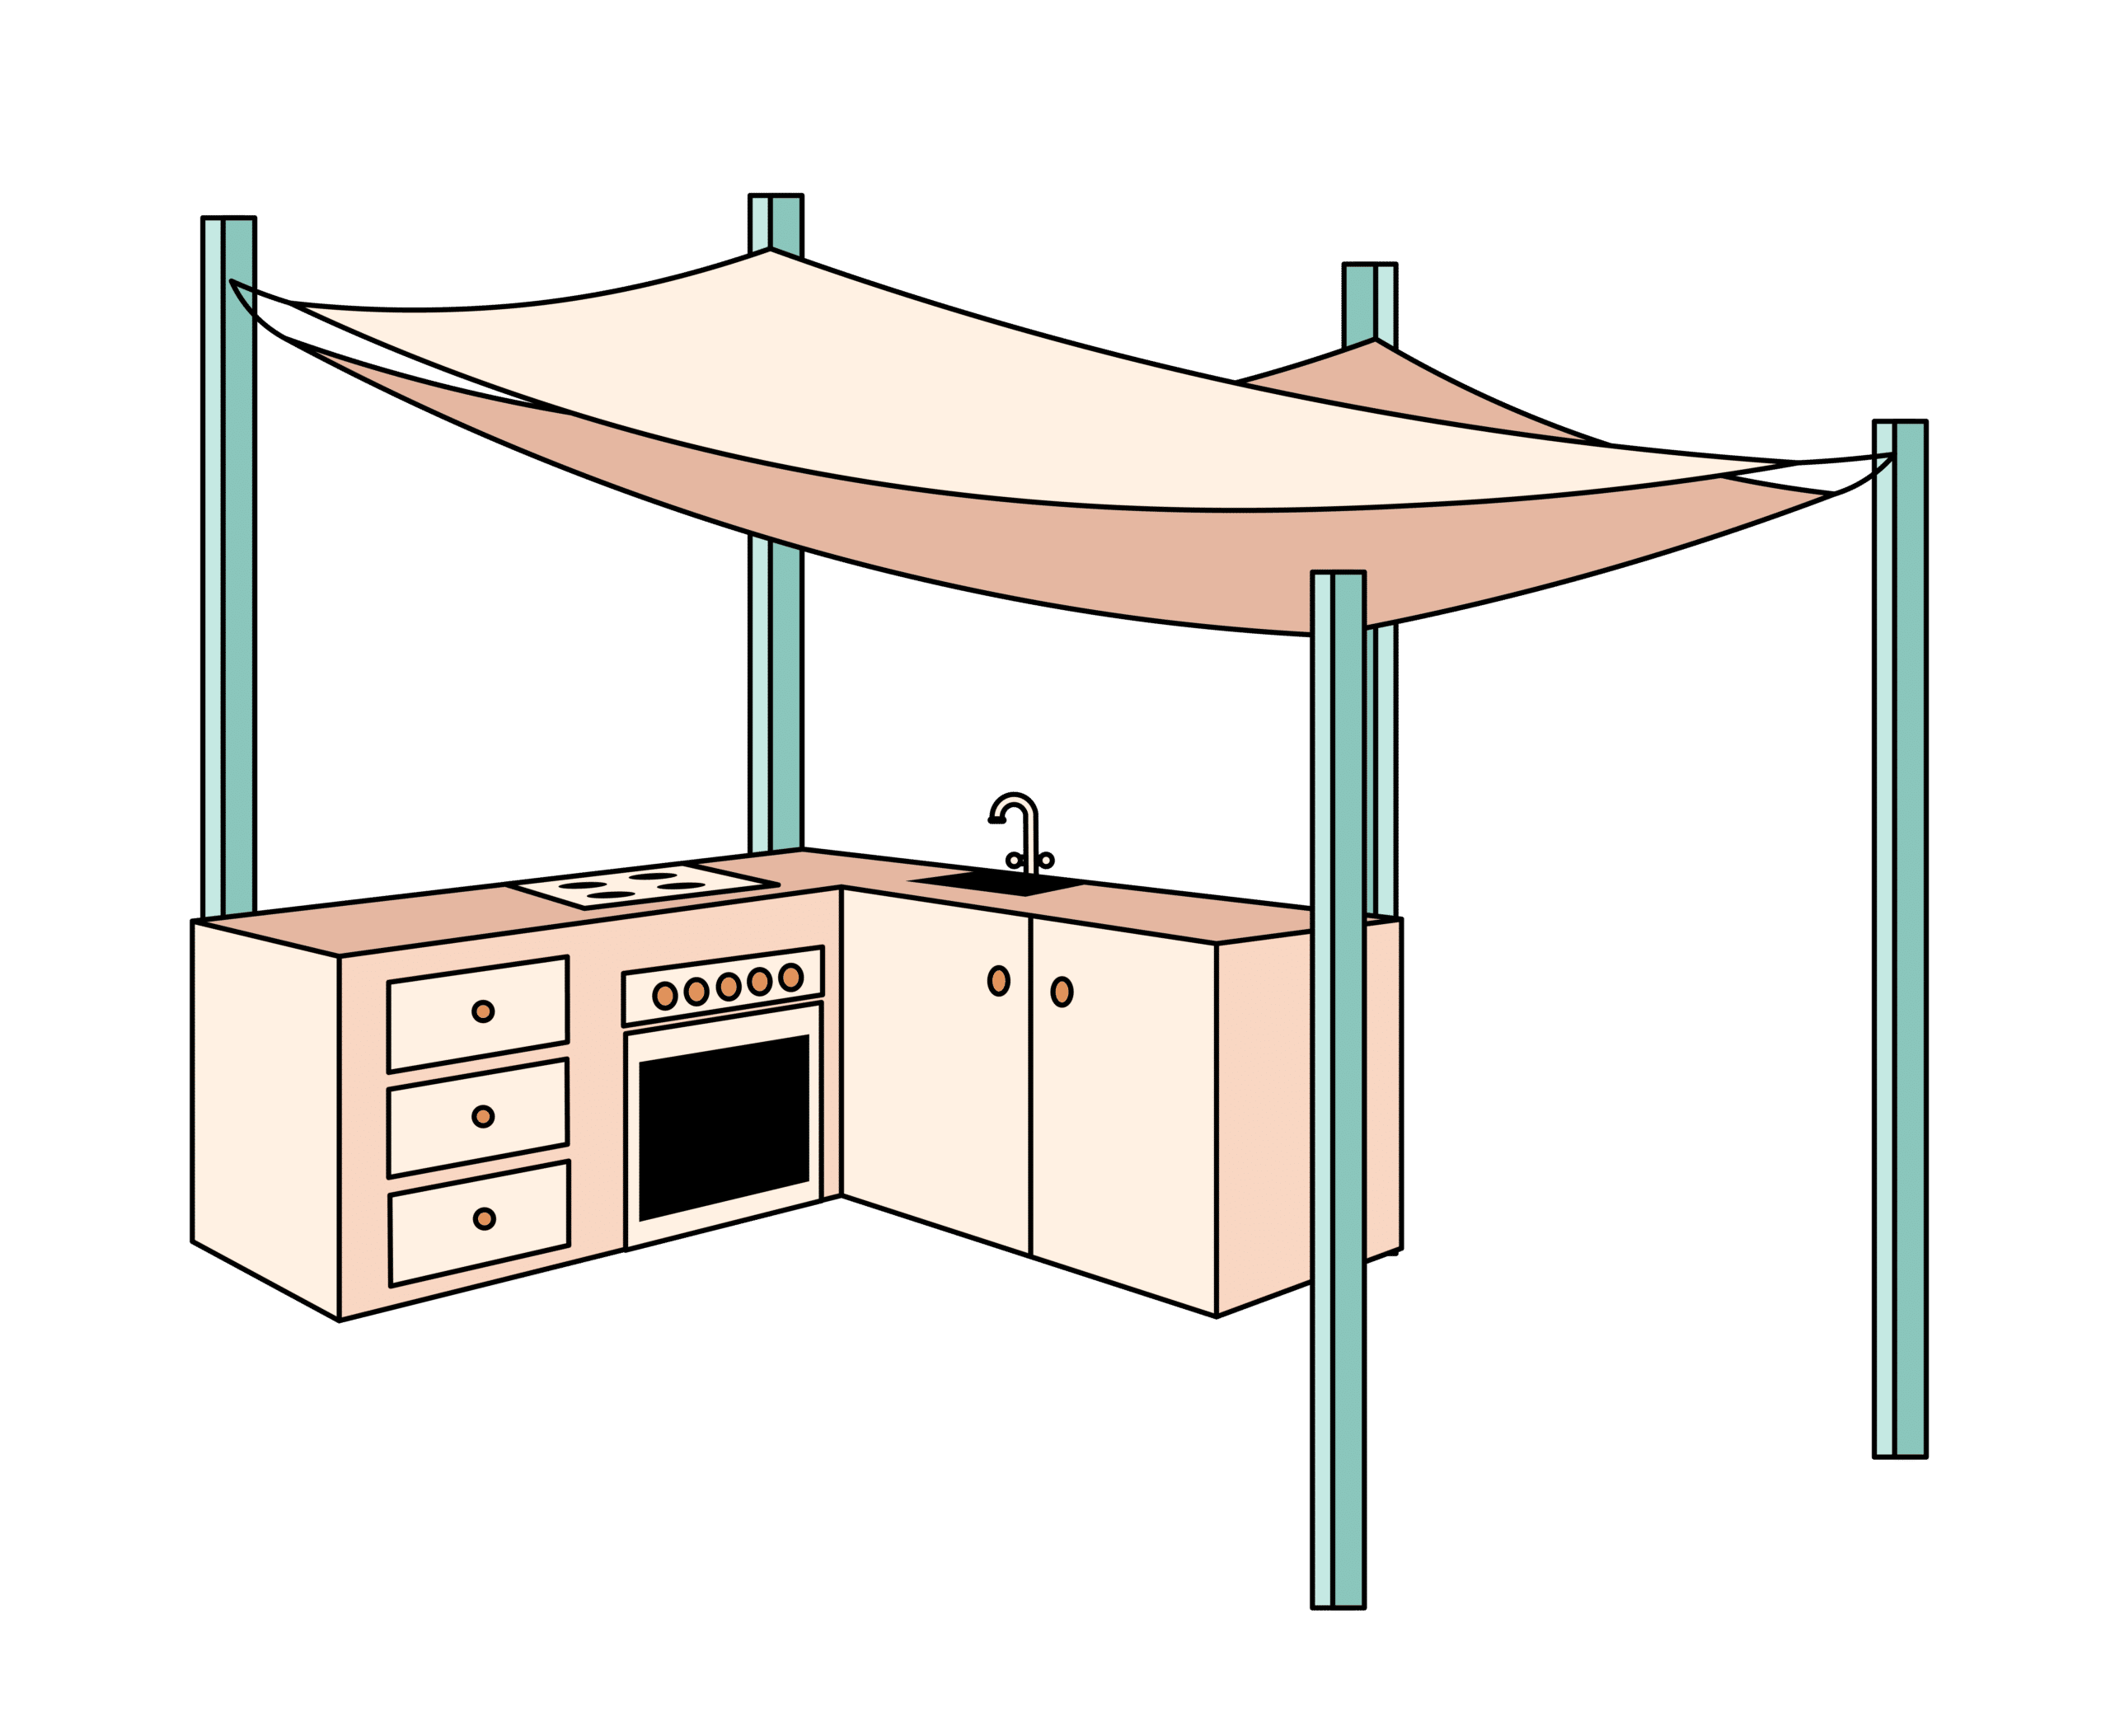 Sail shade roof for outdoor kitchen